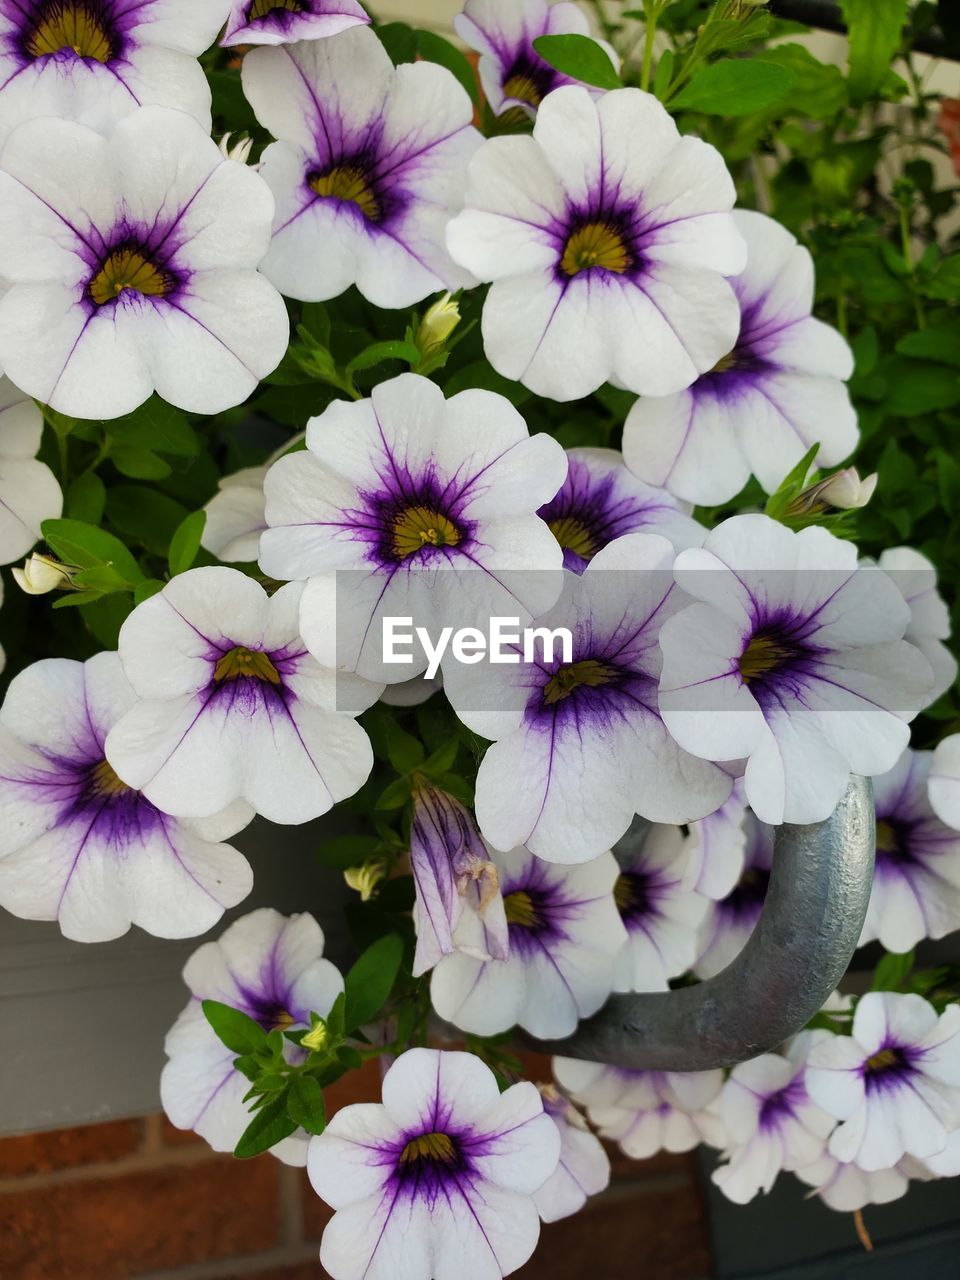 flower, flowering plant, plant, freshness, beauty in nature, fragility, petal, purple, close-up, flower head, inflorescence, growth, nature, pansy, no people, white, day, botany, springtime, high angle view, outdoors, blossom, focus on foreground, pollen